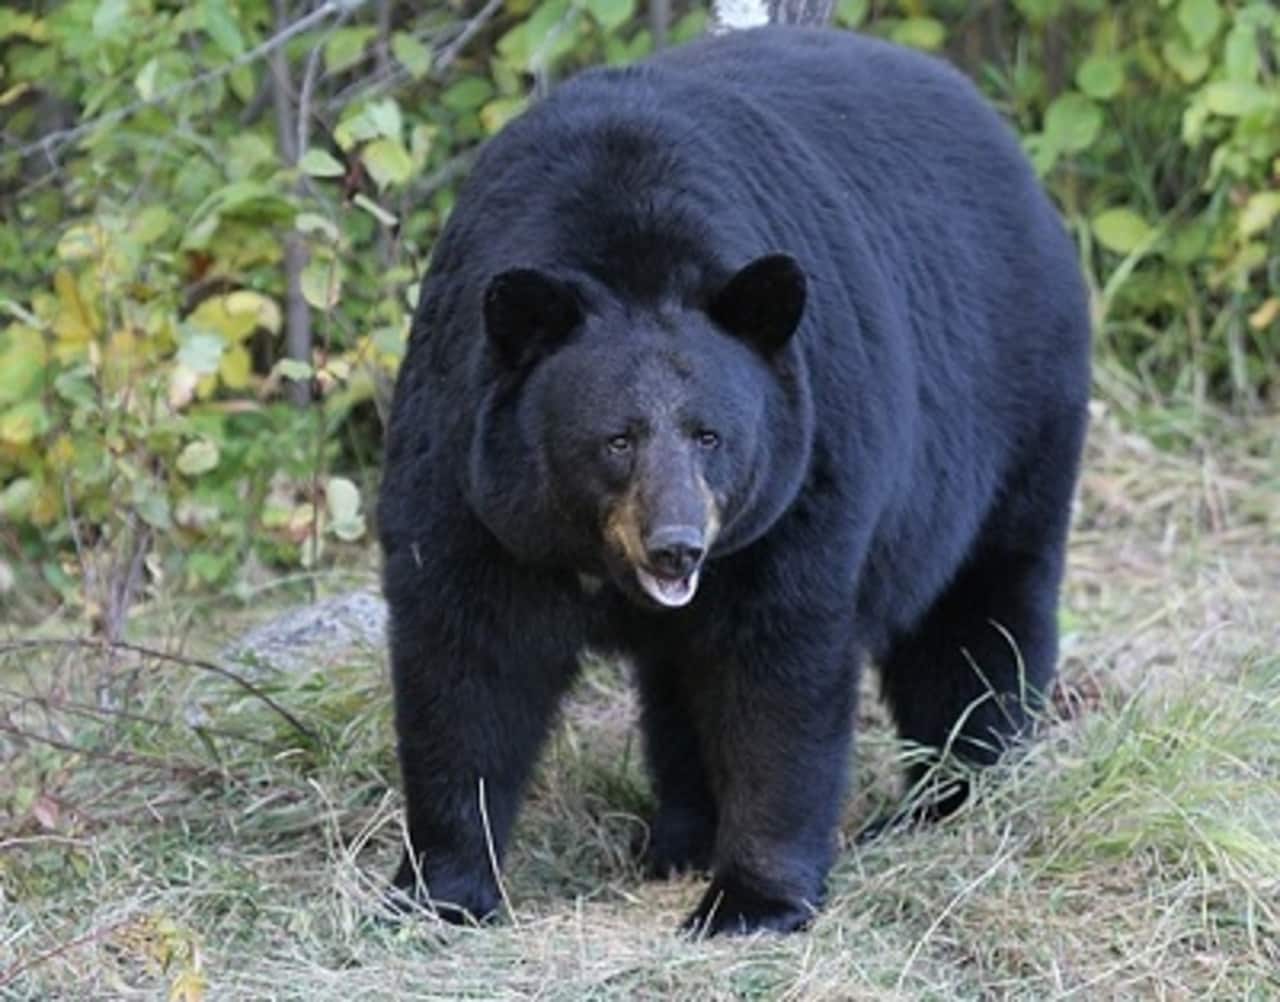 North Castle police were called to a business on Bedford-Banksville Road Sunday after a roaming bear briefly kept the owner and two employees trapped inside.